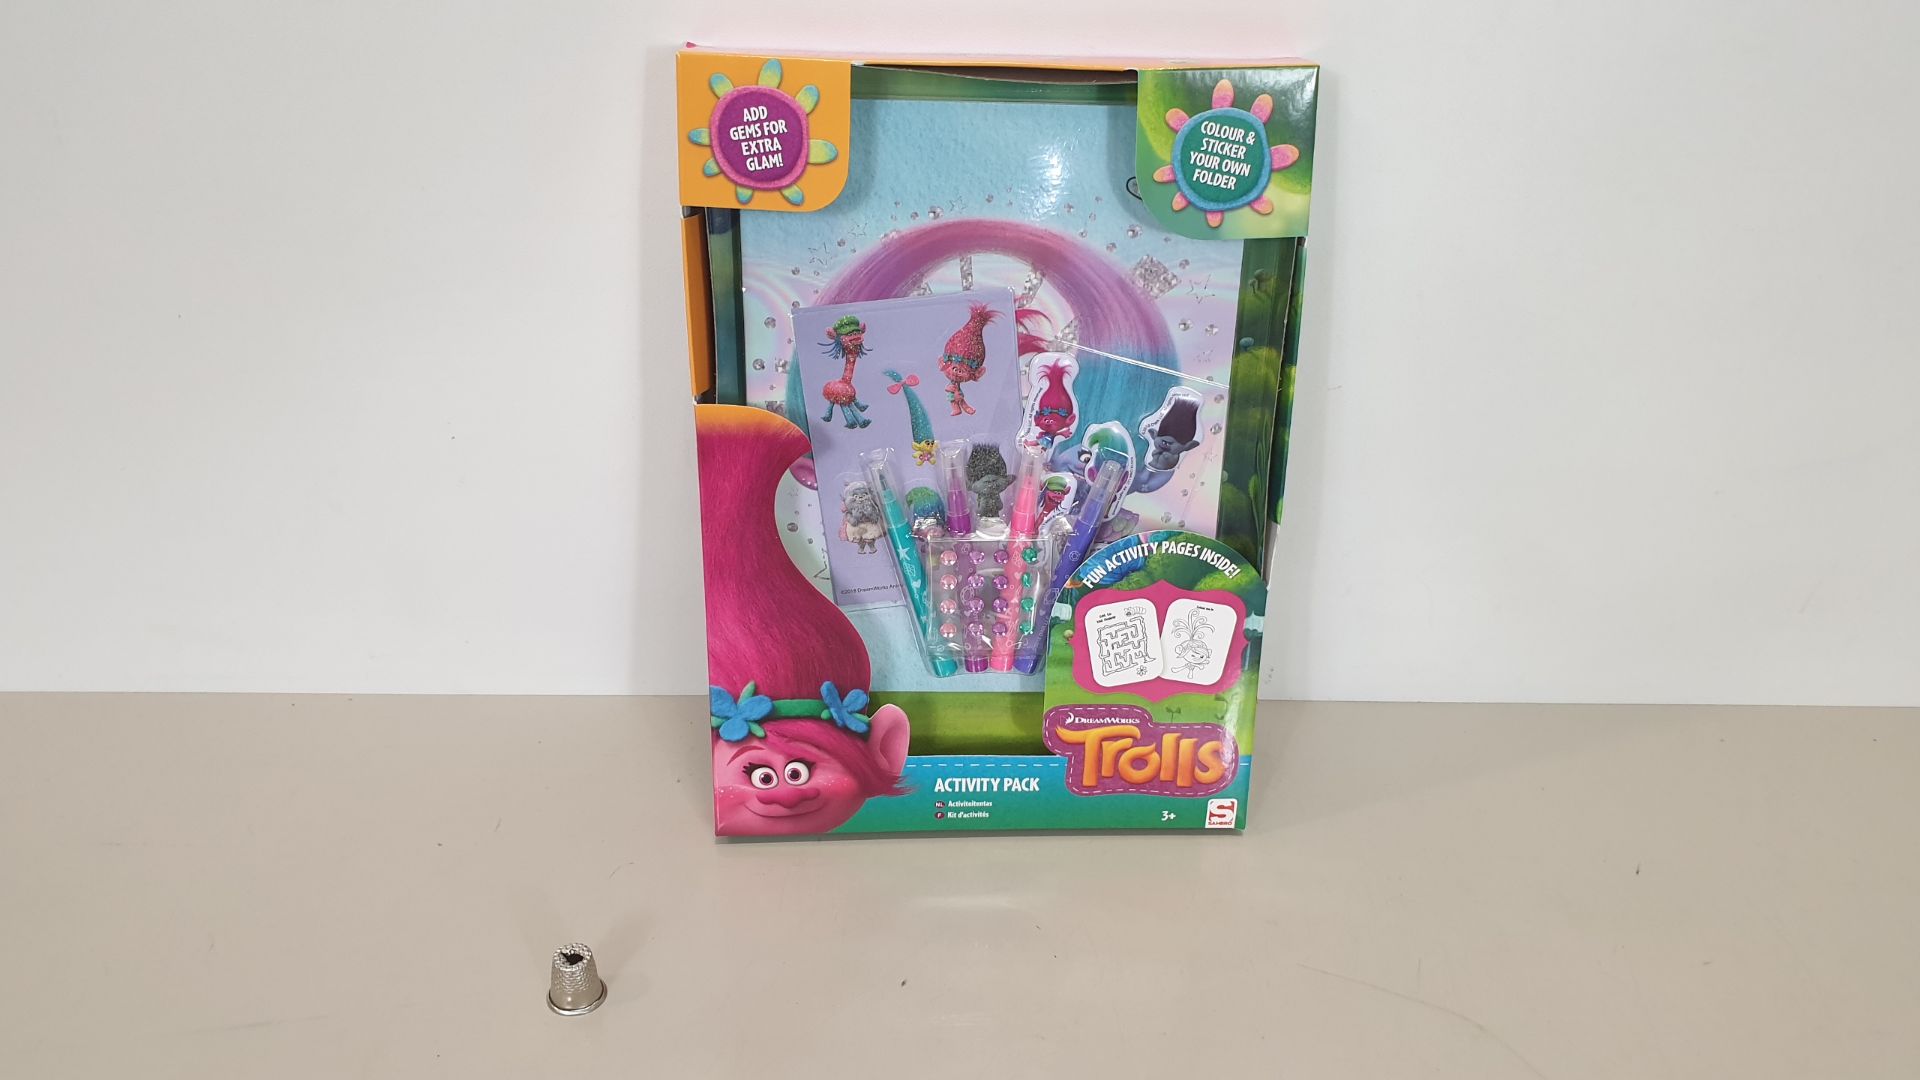 156 X BRAND NEW DREAM WORK TROLLS ACTIVITY PACK, INCLUDES 60 PAGE ACTIVITY FOLDER, 4 MARKERS, 2